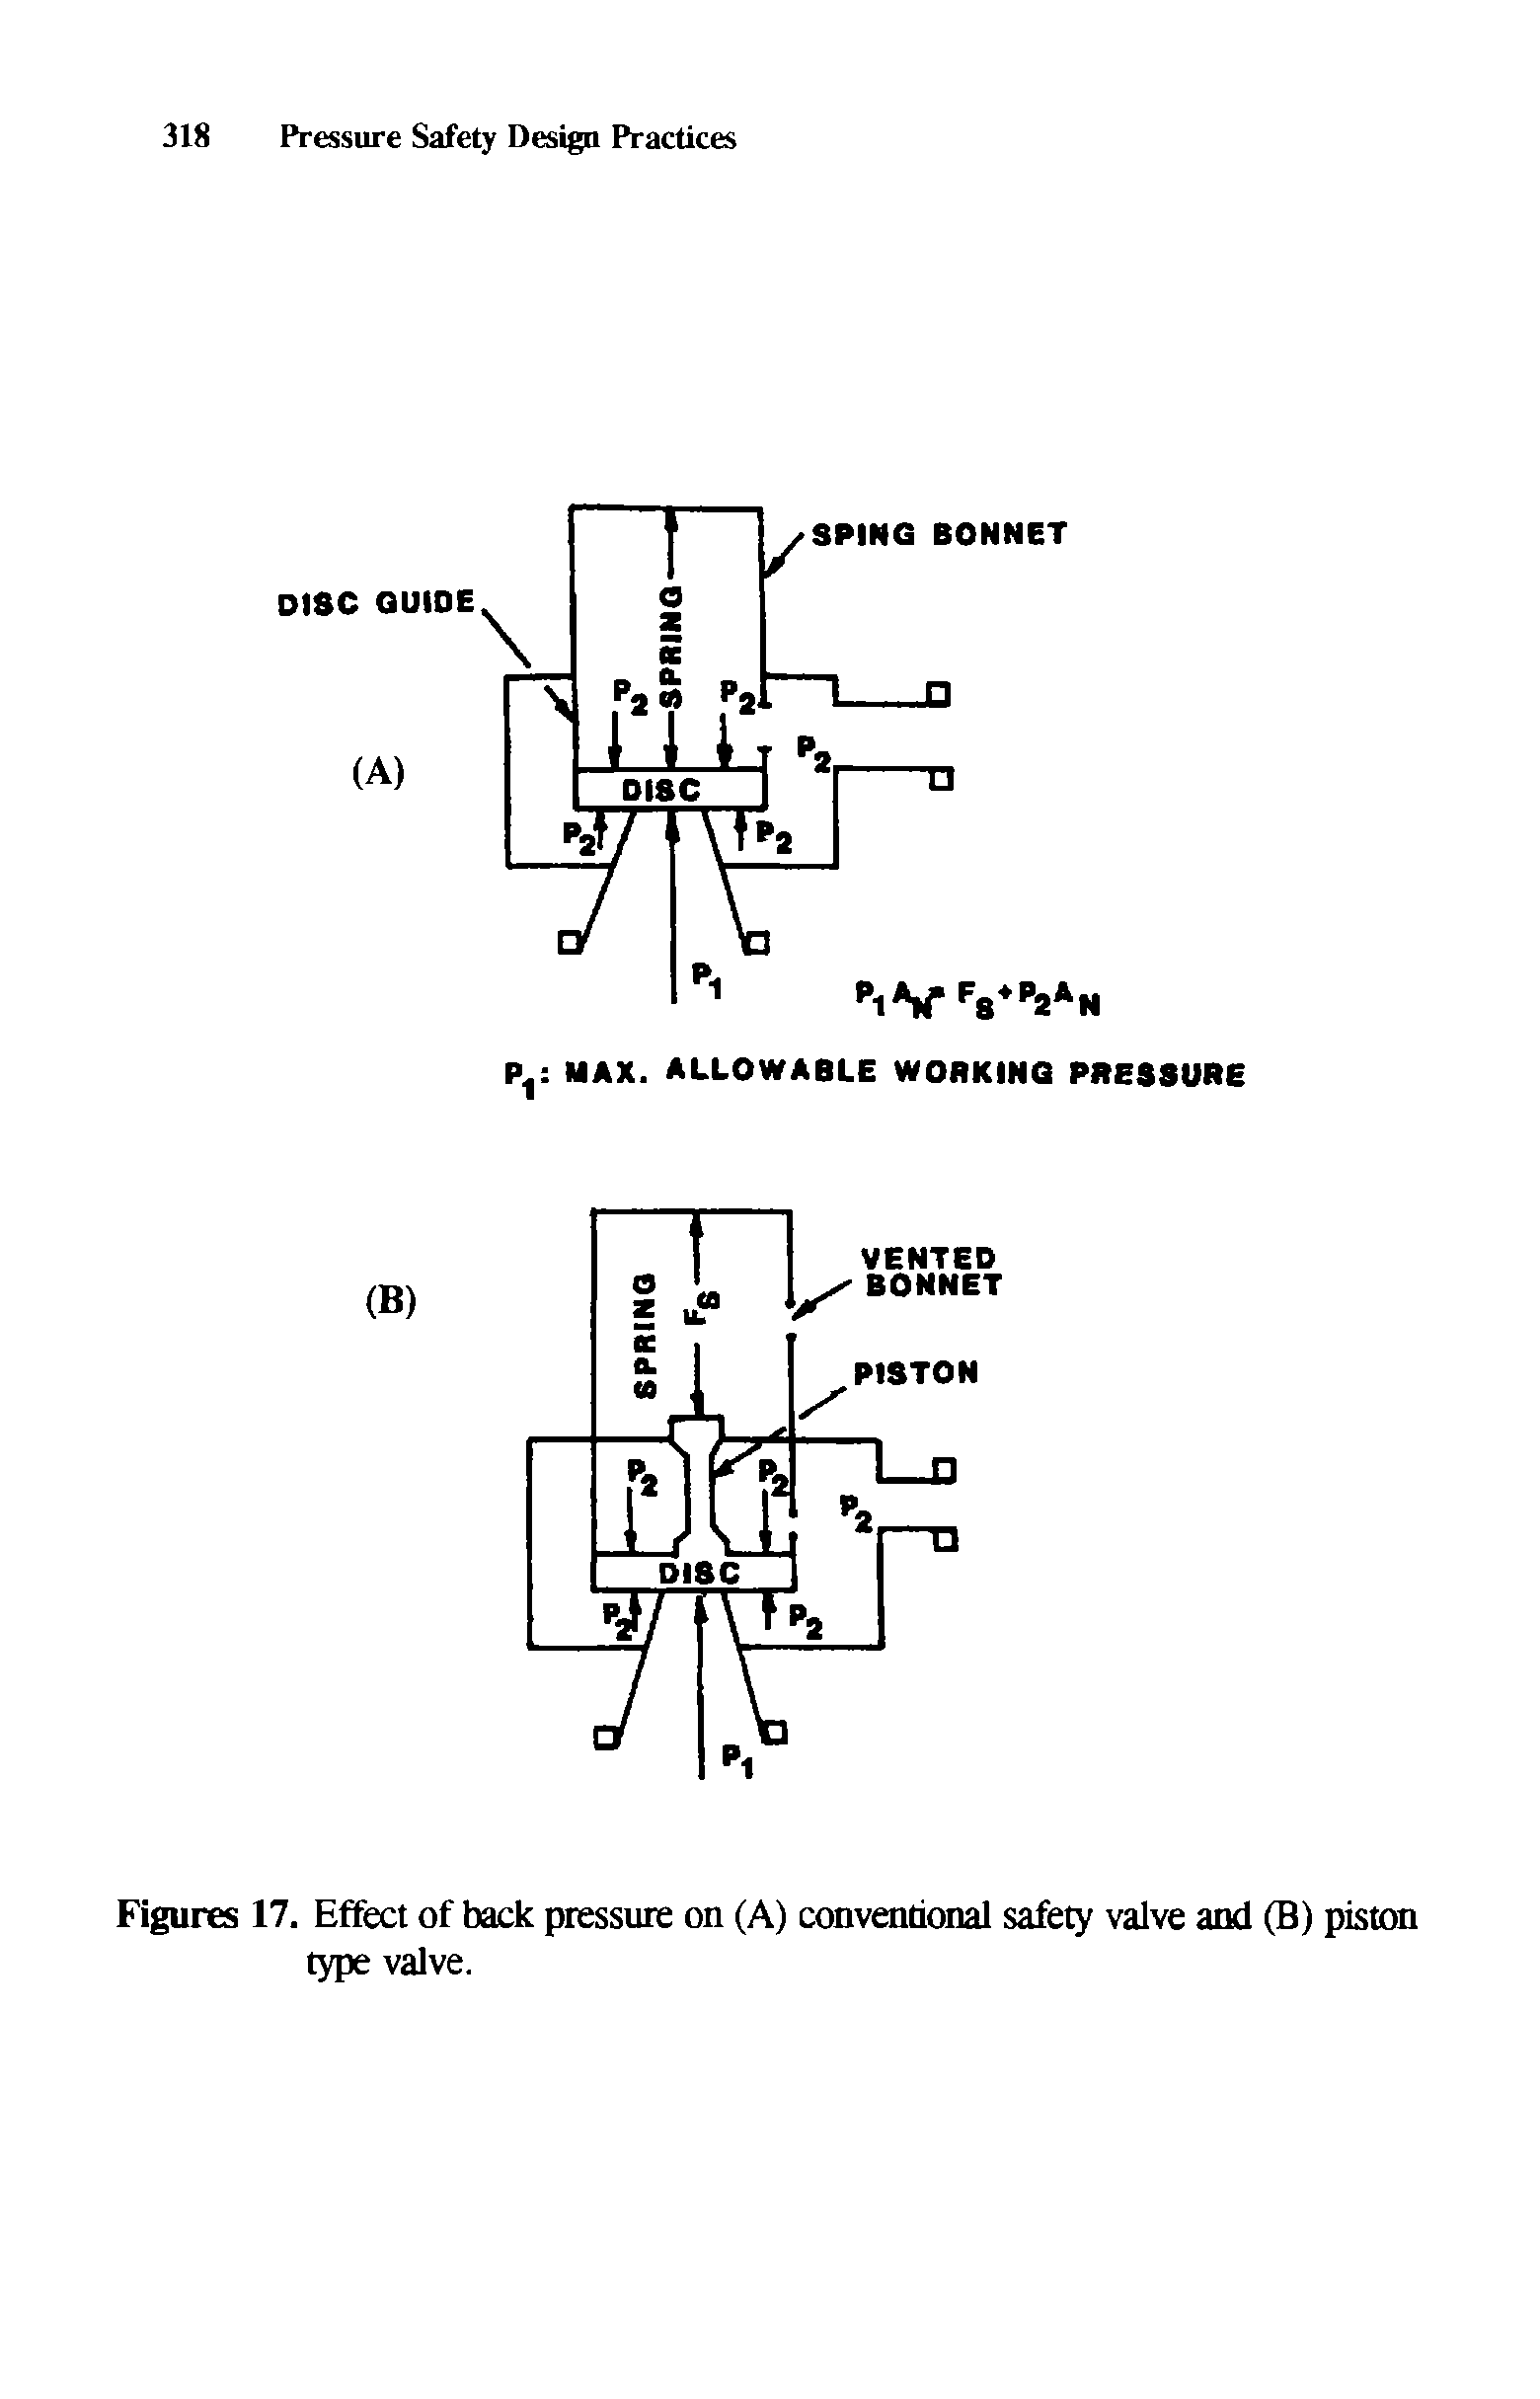 Figures 17. Effect of back pressure on (A) conventional safety valve and (B) piston type valve.